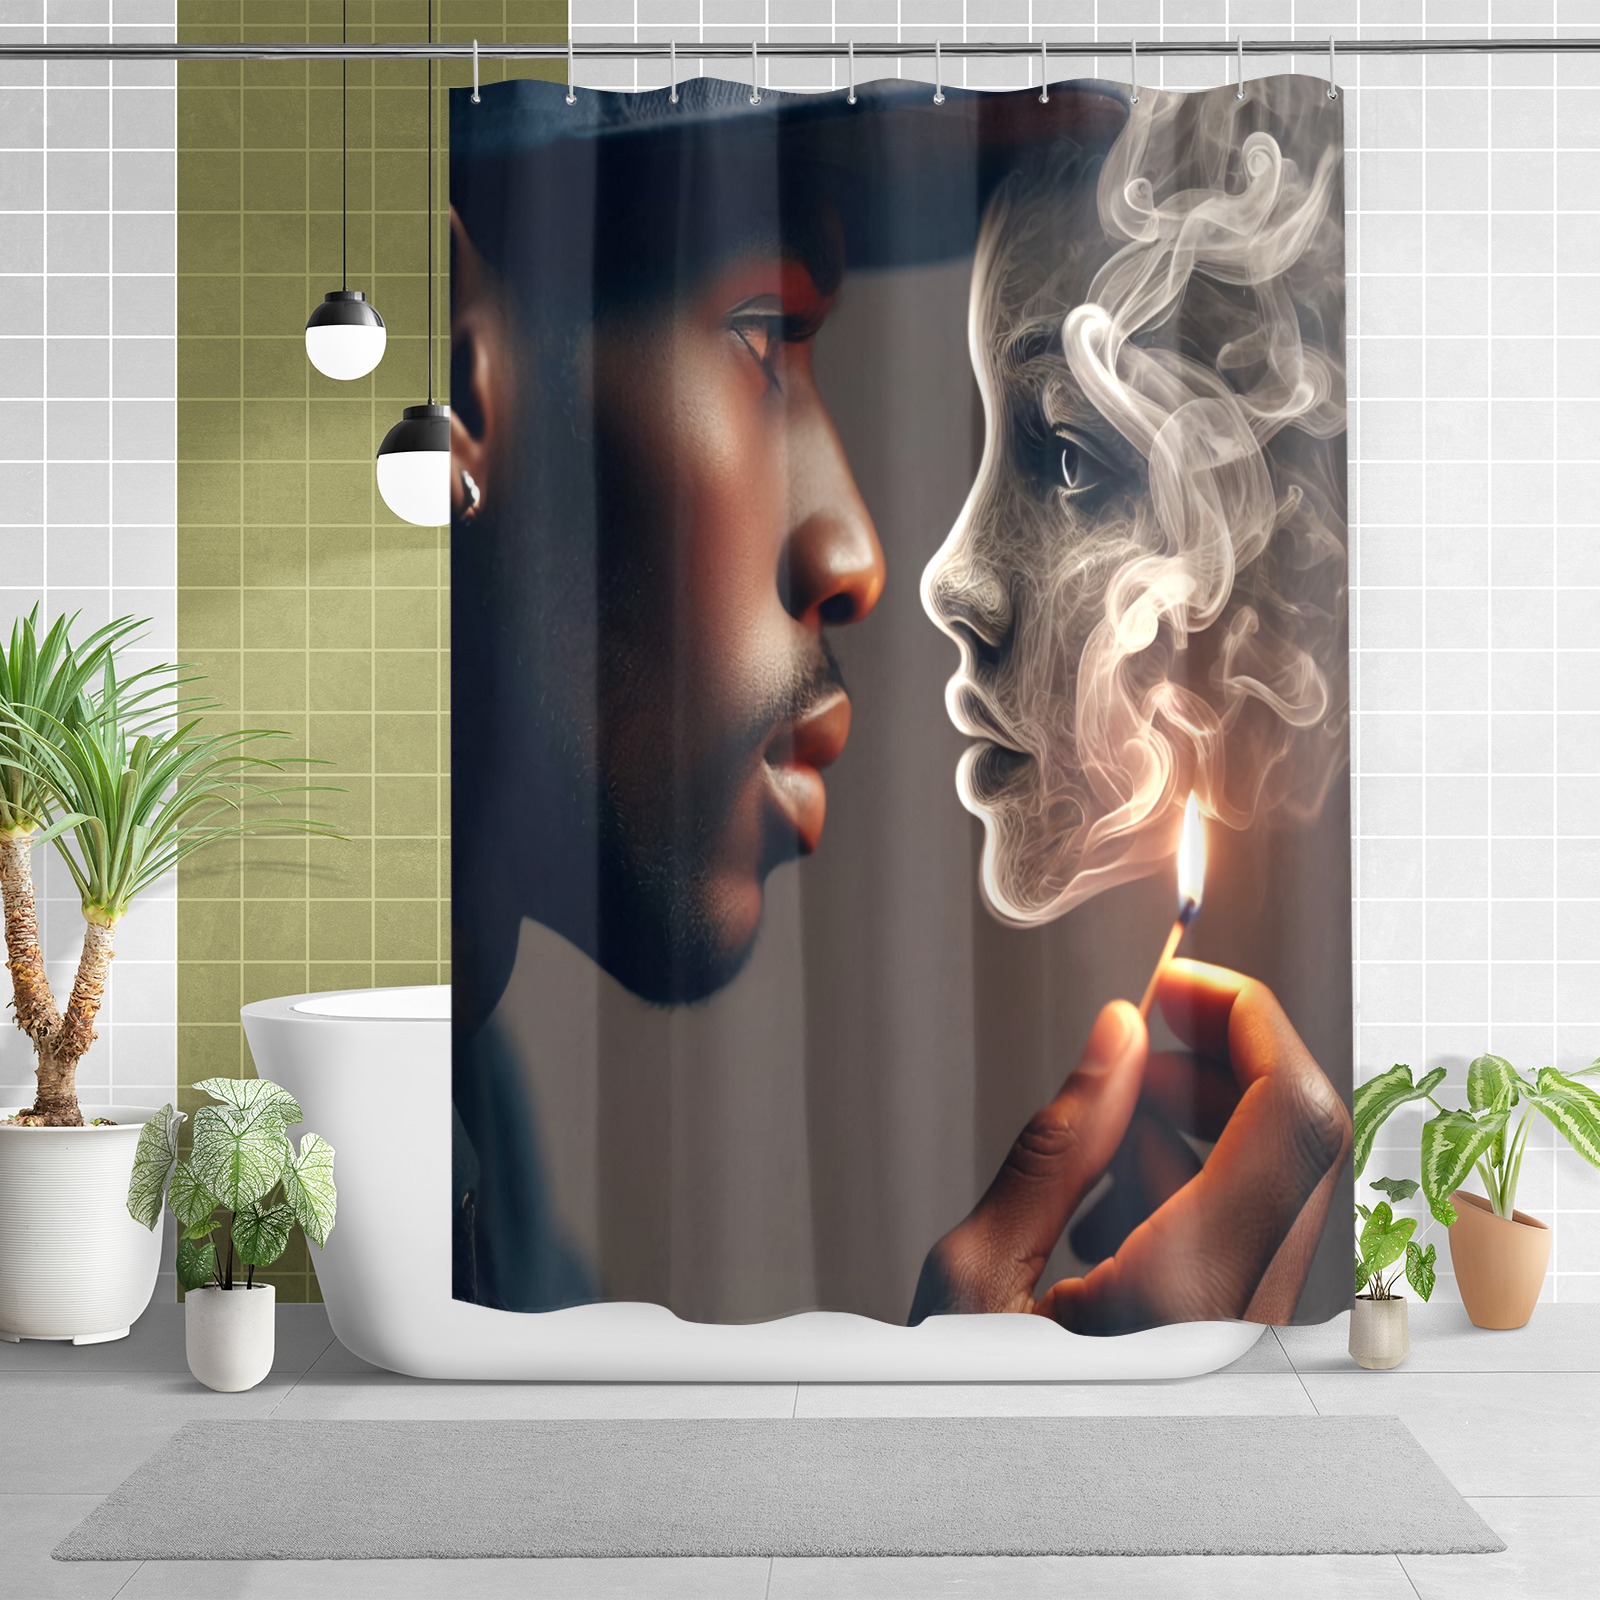 Man's love in smoke - African American Shower Curtain 69"x70"